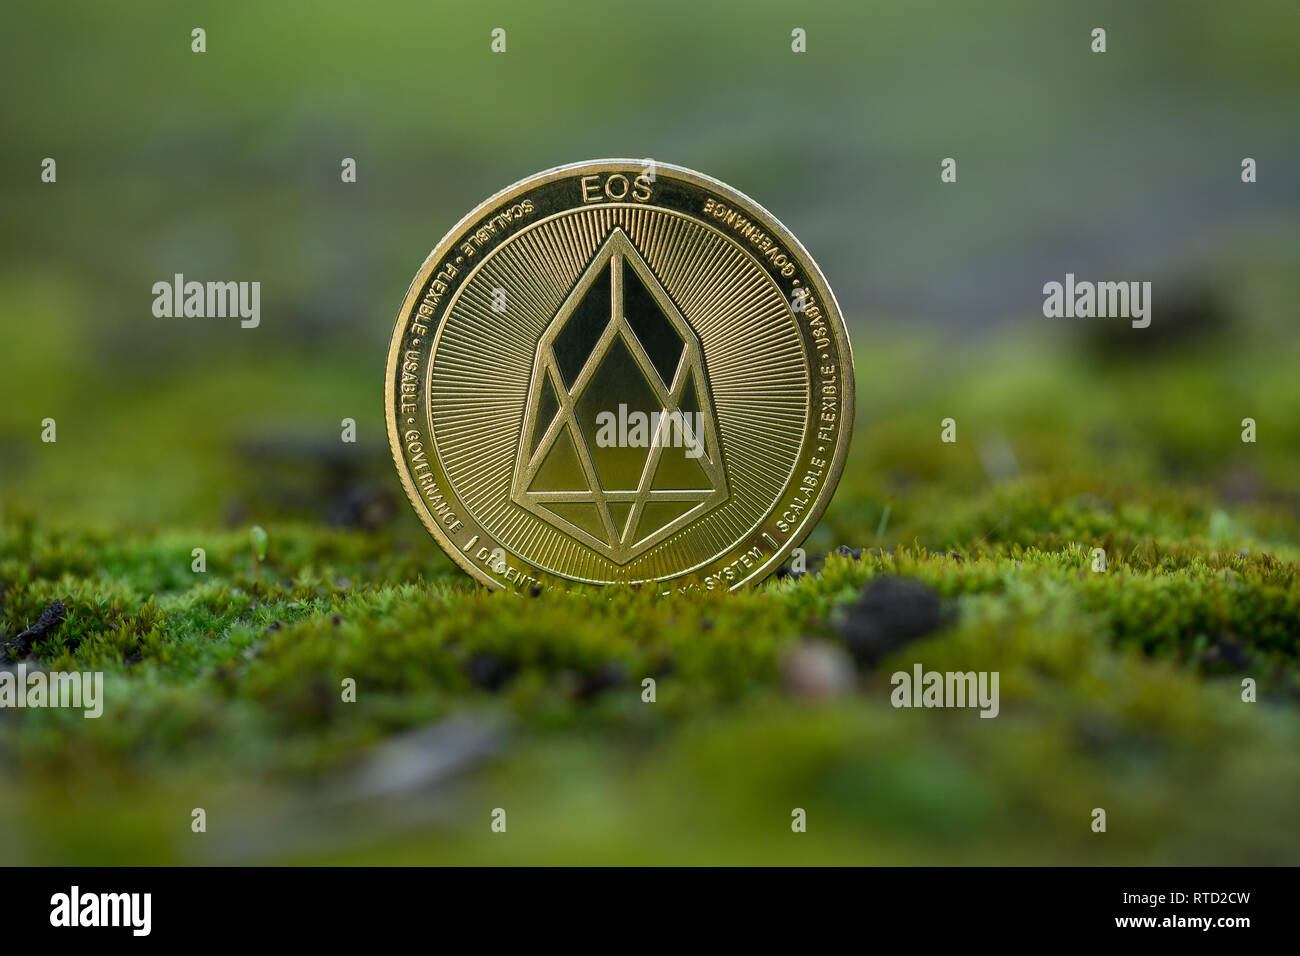 Eos cryptocurrency physical coin placed on the moss in the center of the frame. Stock Photo